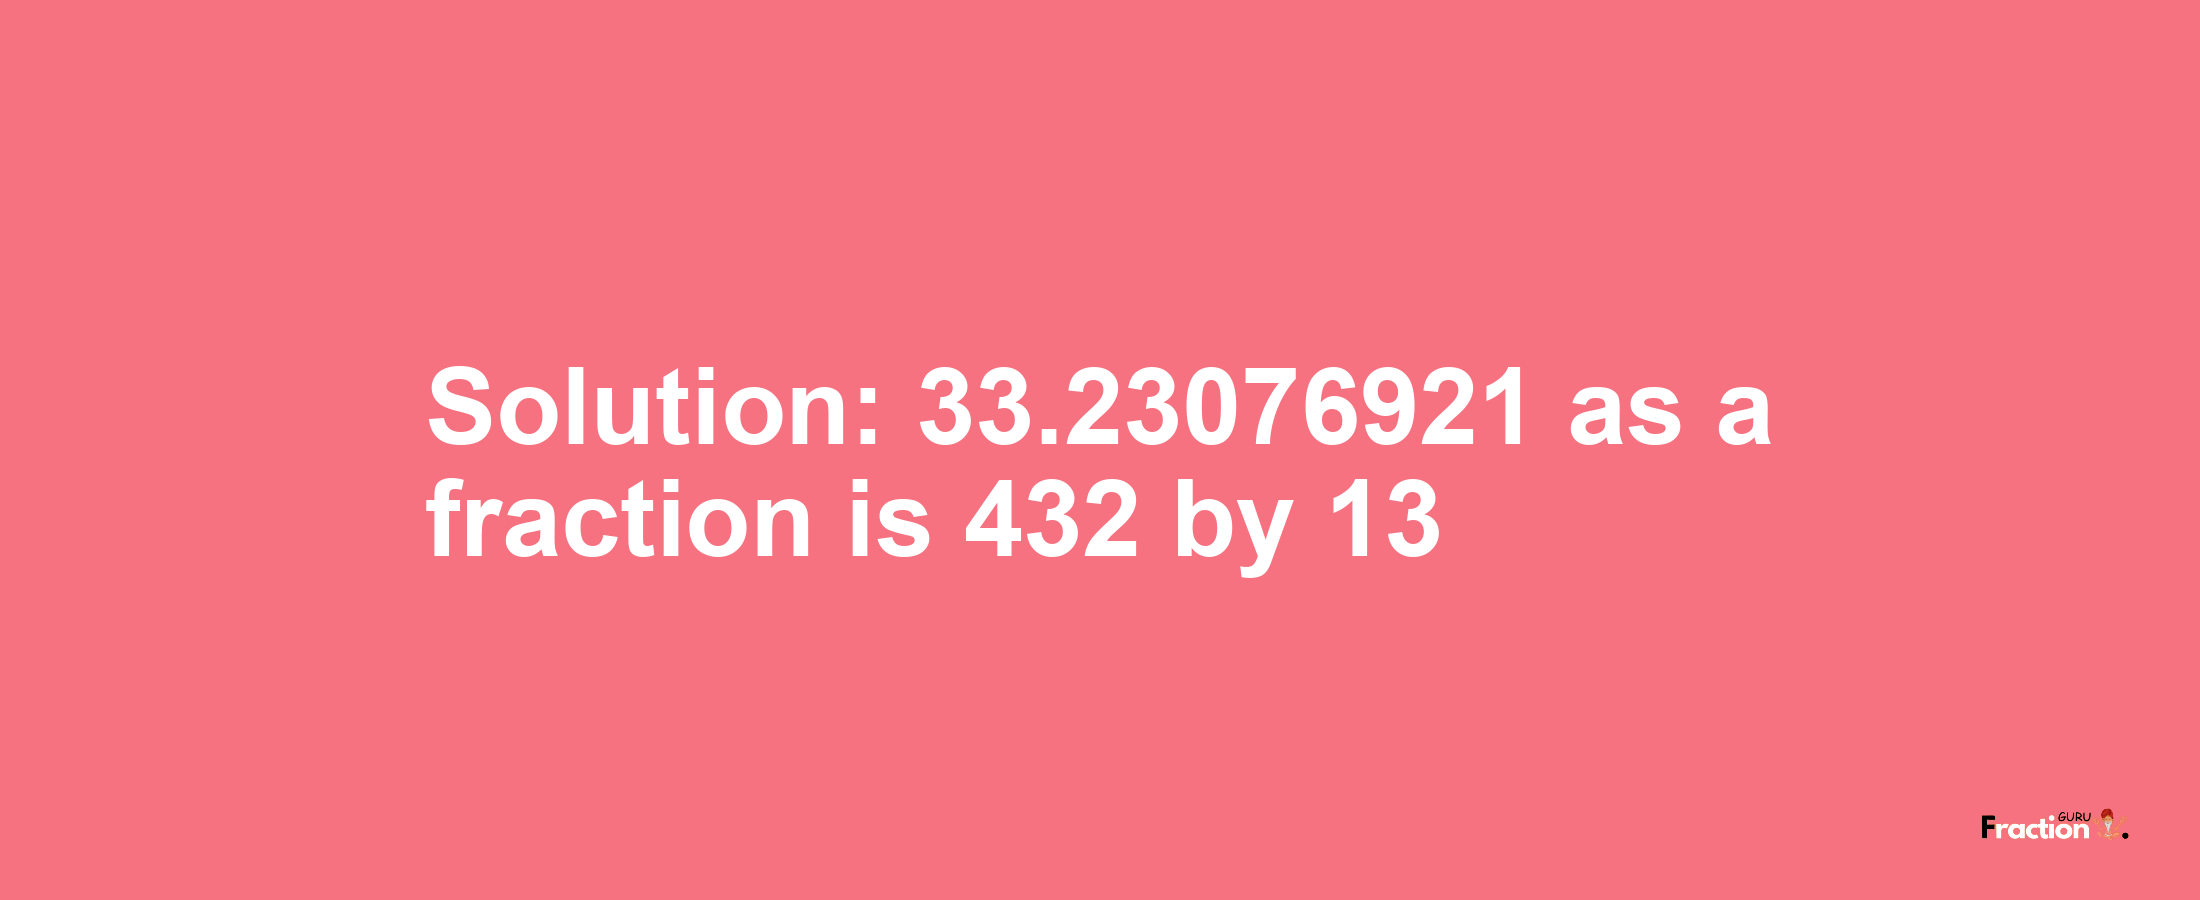 Solution:33.23076921 as a fraction is 432/13